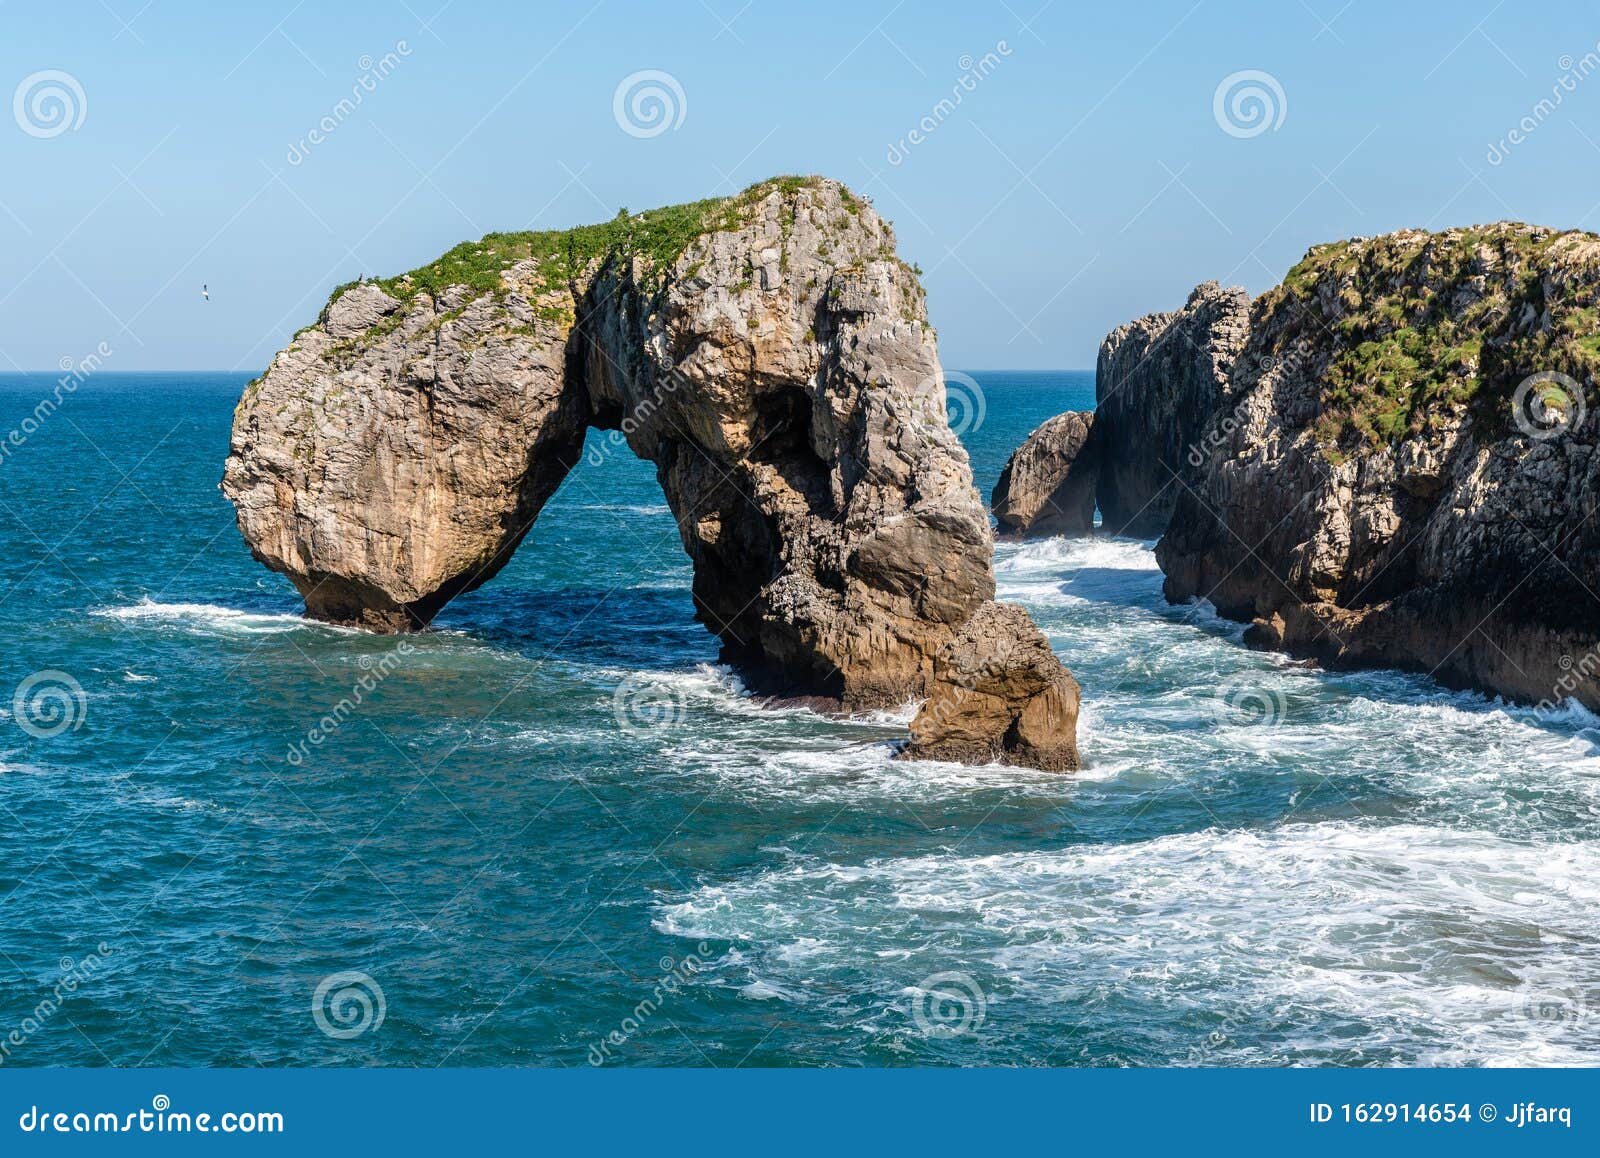 scenic view of sea against blue sky in rocky coast